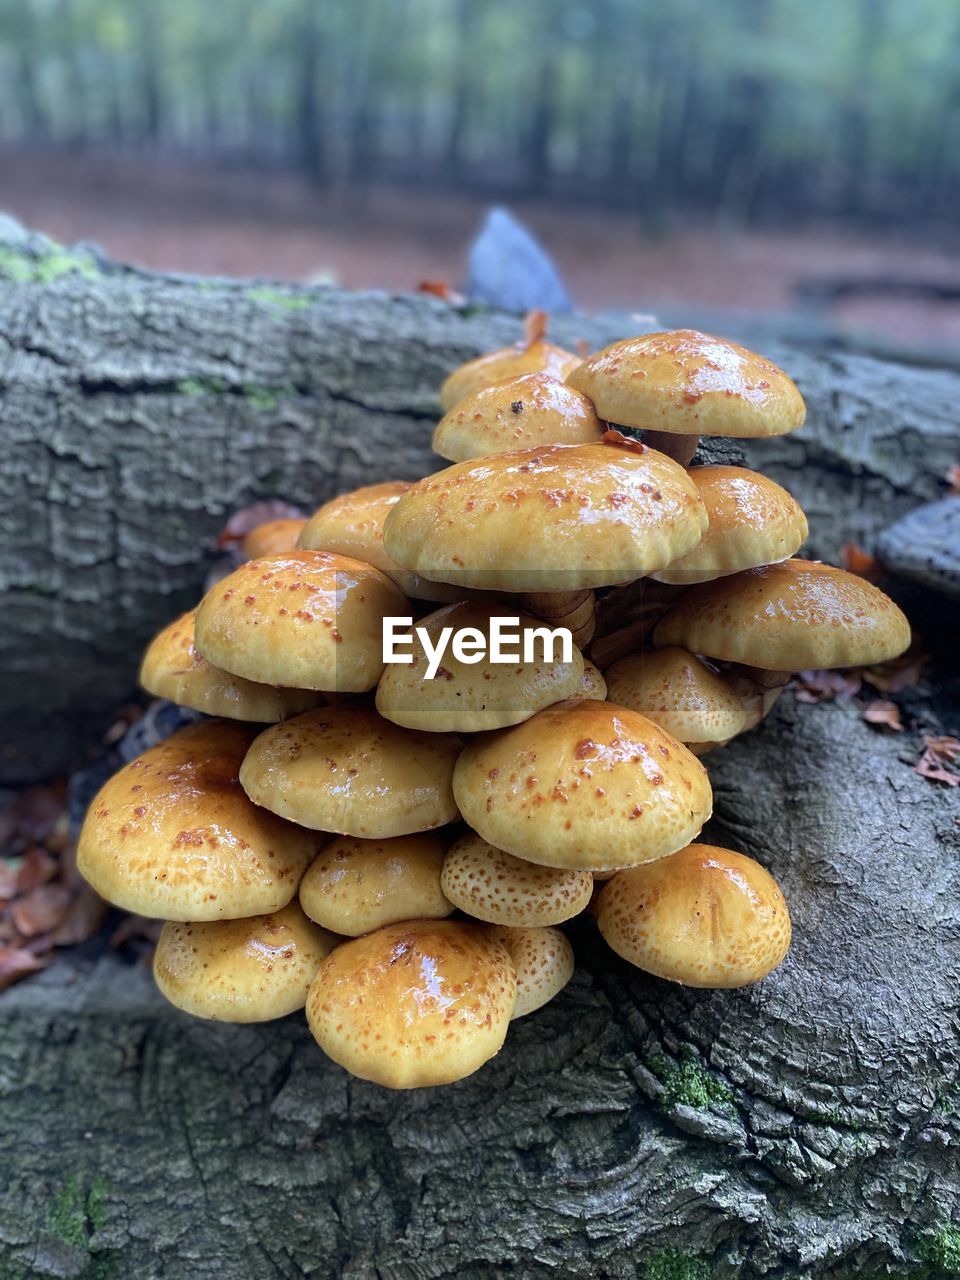 food, food and drink, vegetable, plant, tree, mushroom, fungus, nature, freshness, no people, growth, wellbeing, healthy eating, land, wood, close-up, forest, day, outdoors, large group of objects, abundance, autumn, focus on foreground, edible mushroom, tree trunk, environment, organic